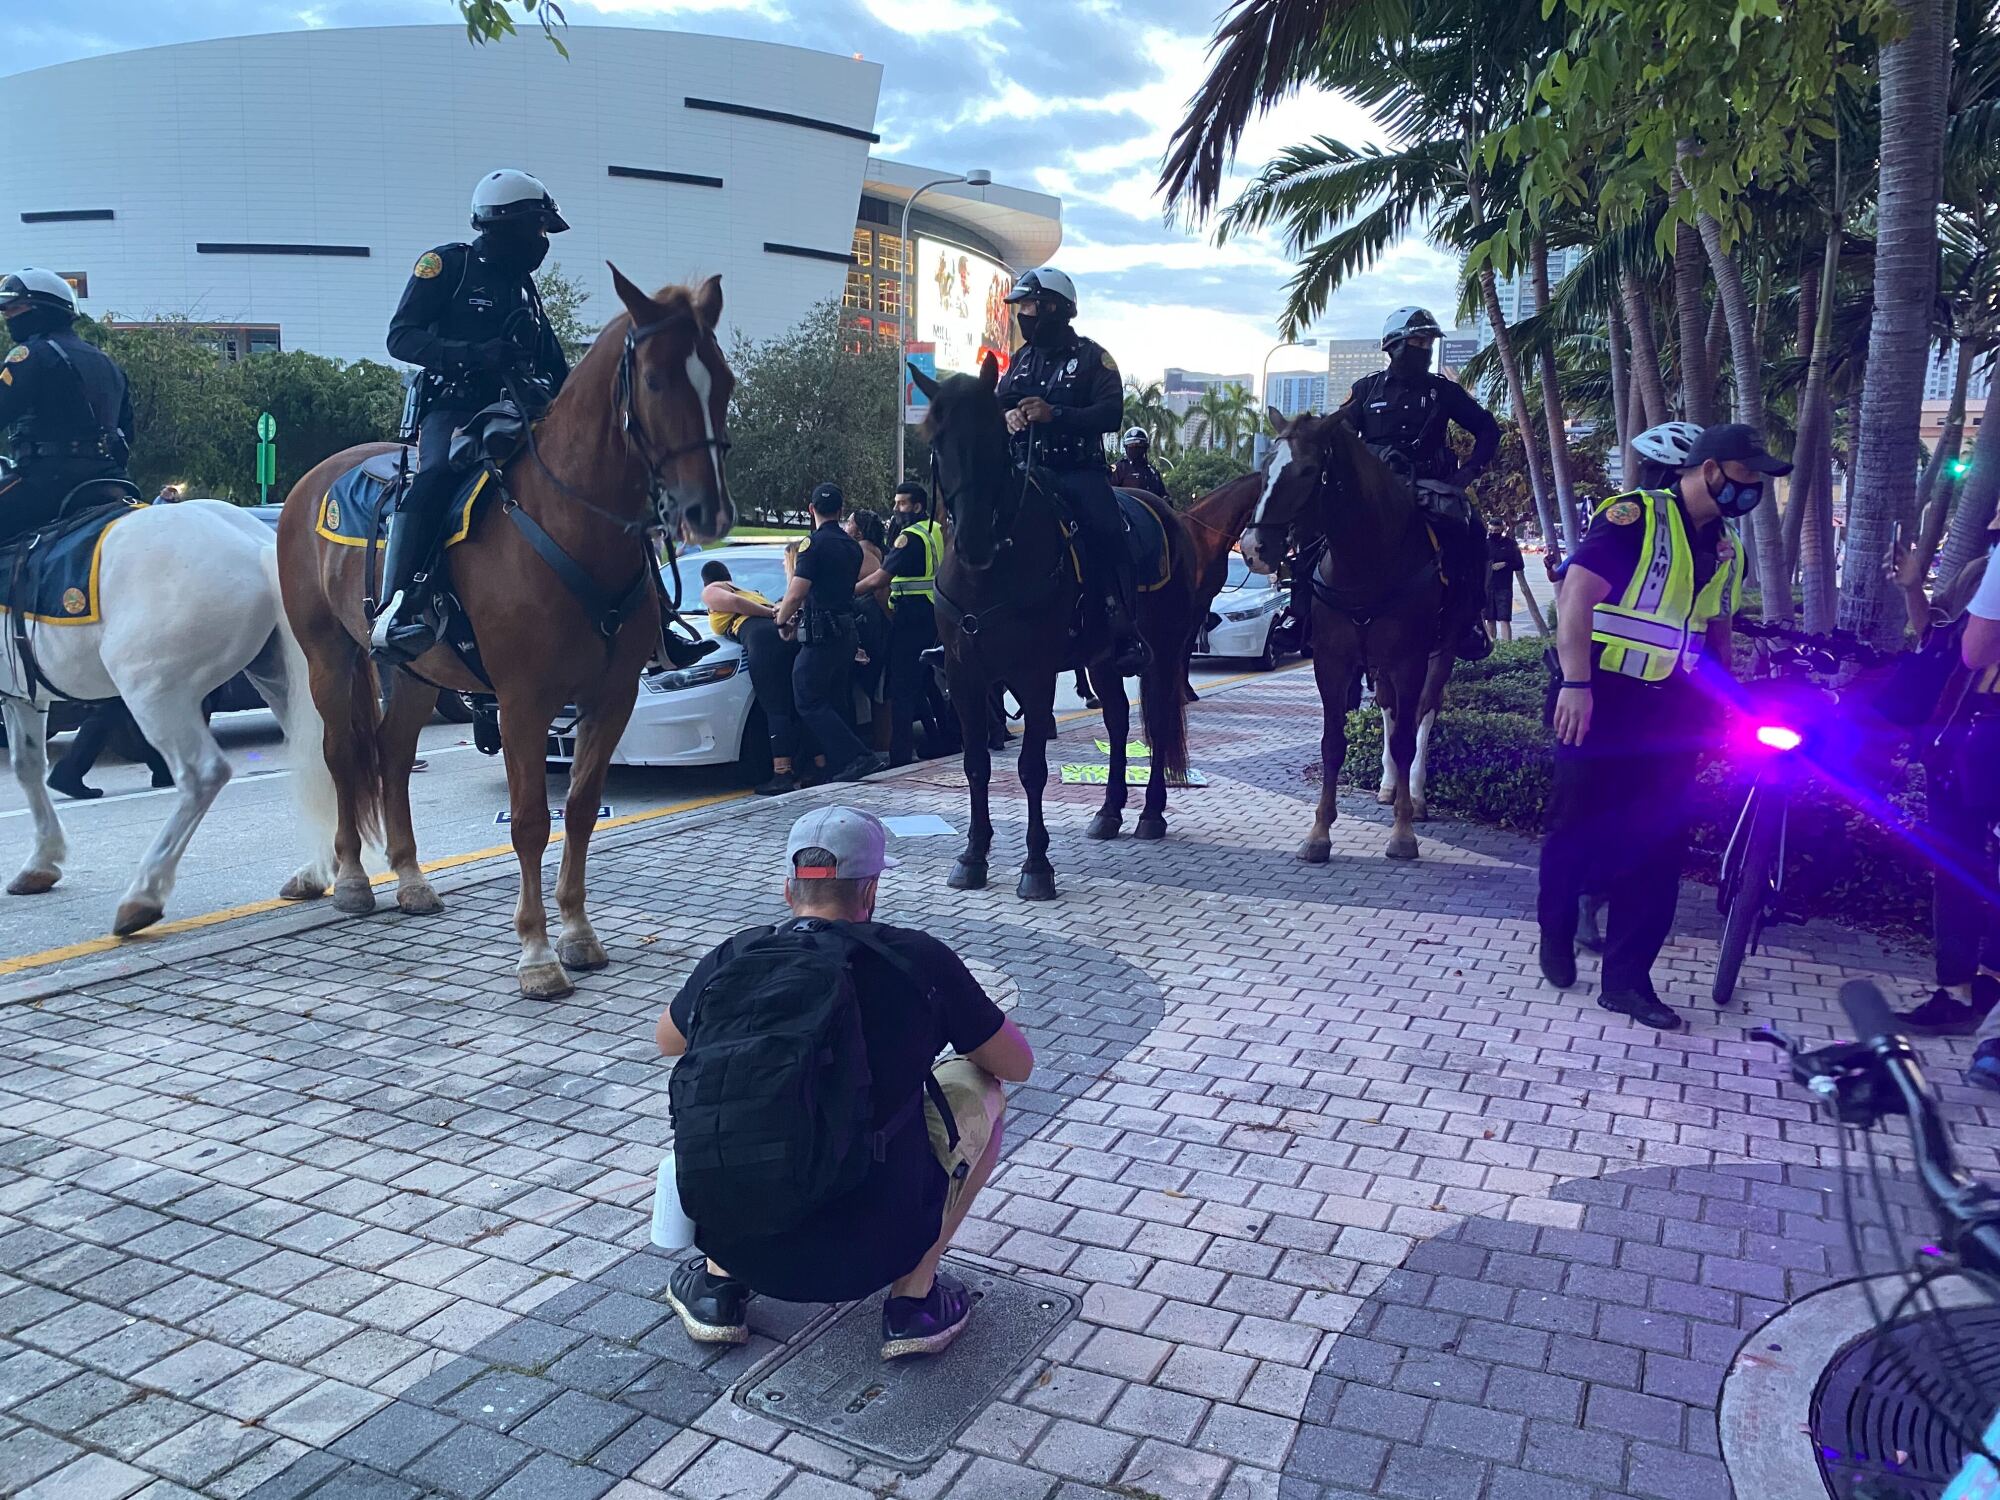 Police on horseback in front of people being arrested